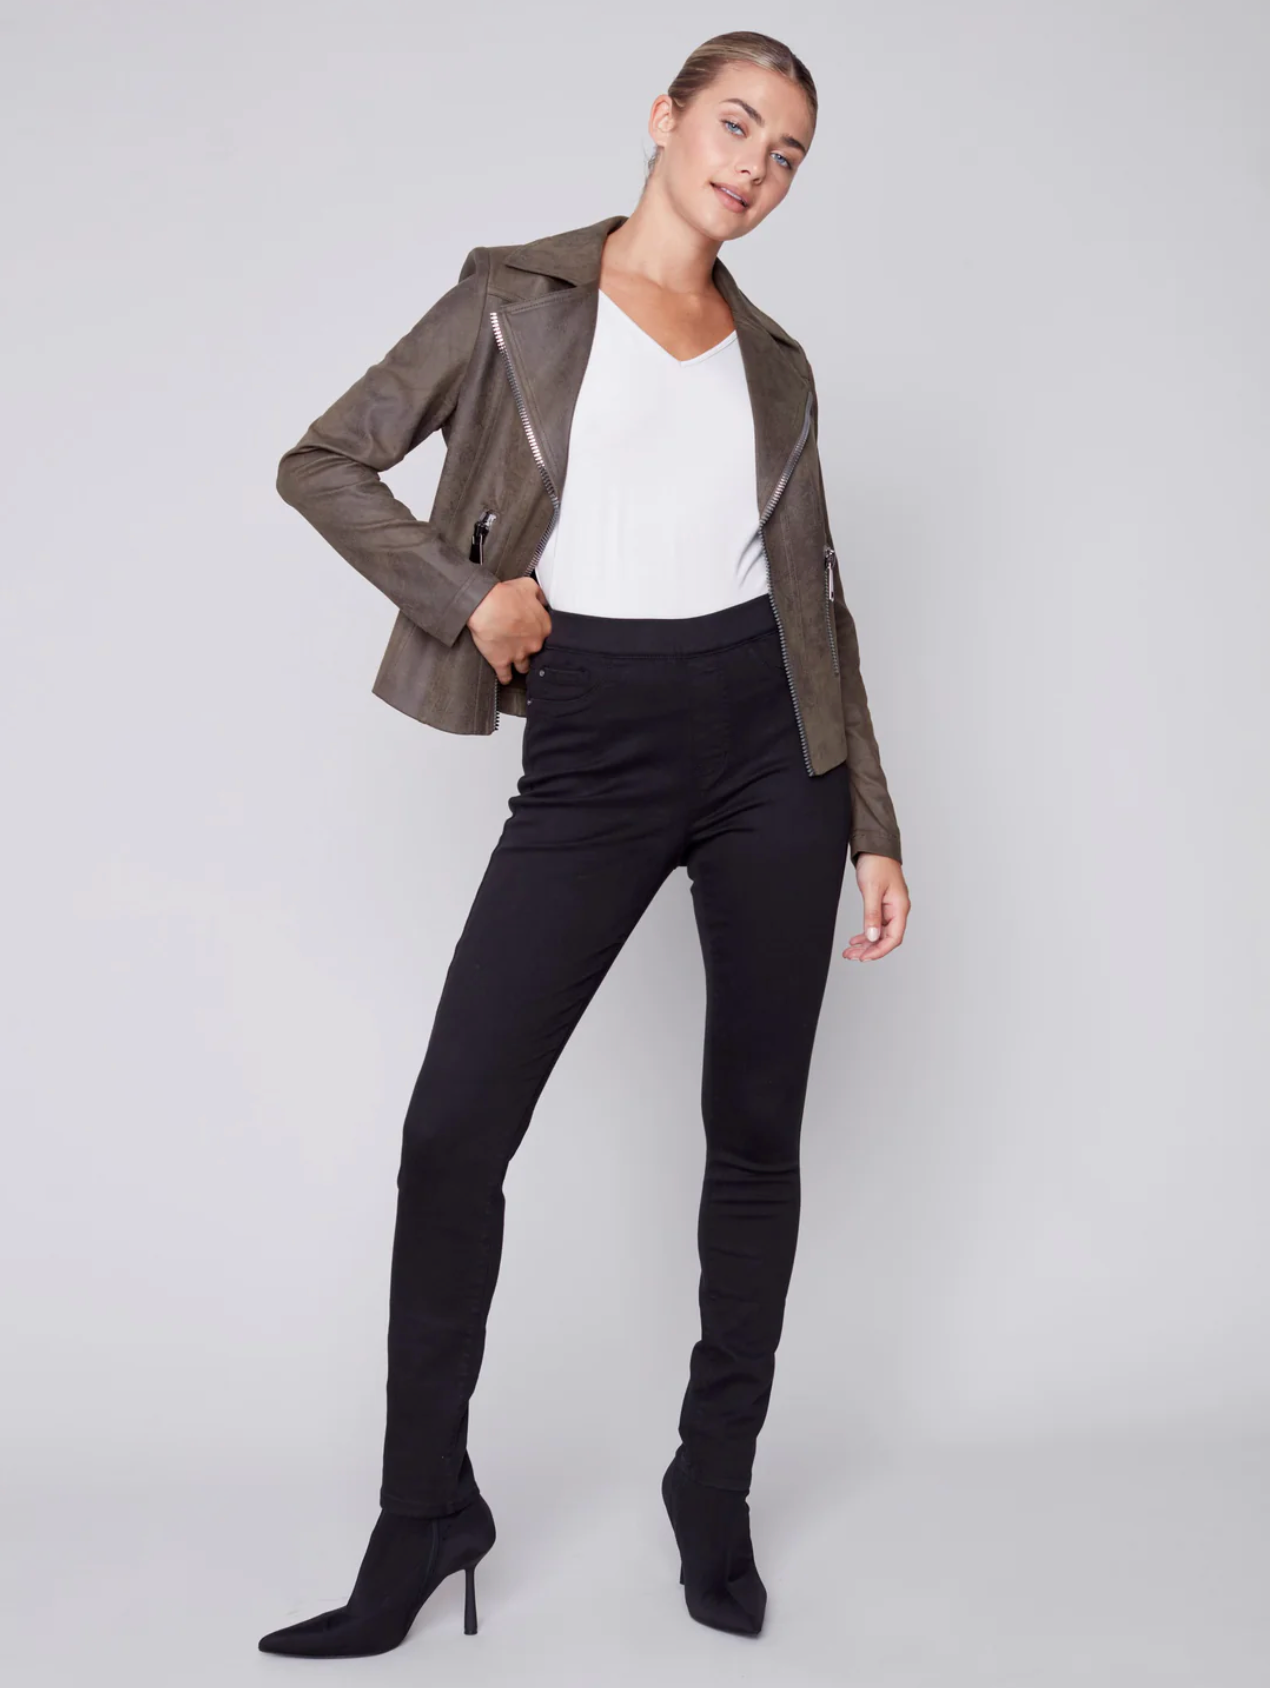 Charlie B Charlie B - Vegan Suede Fabric Metro Jacket - Spruce available at The Good Life Boutique